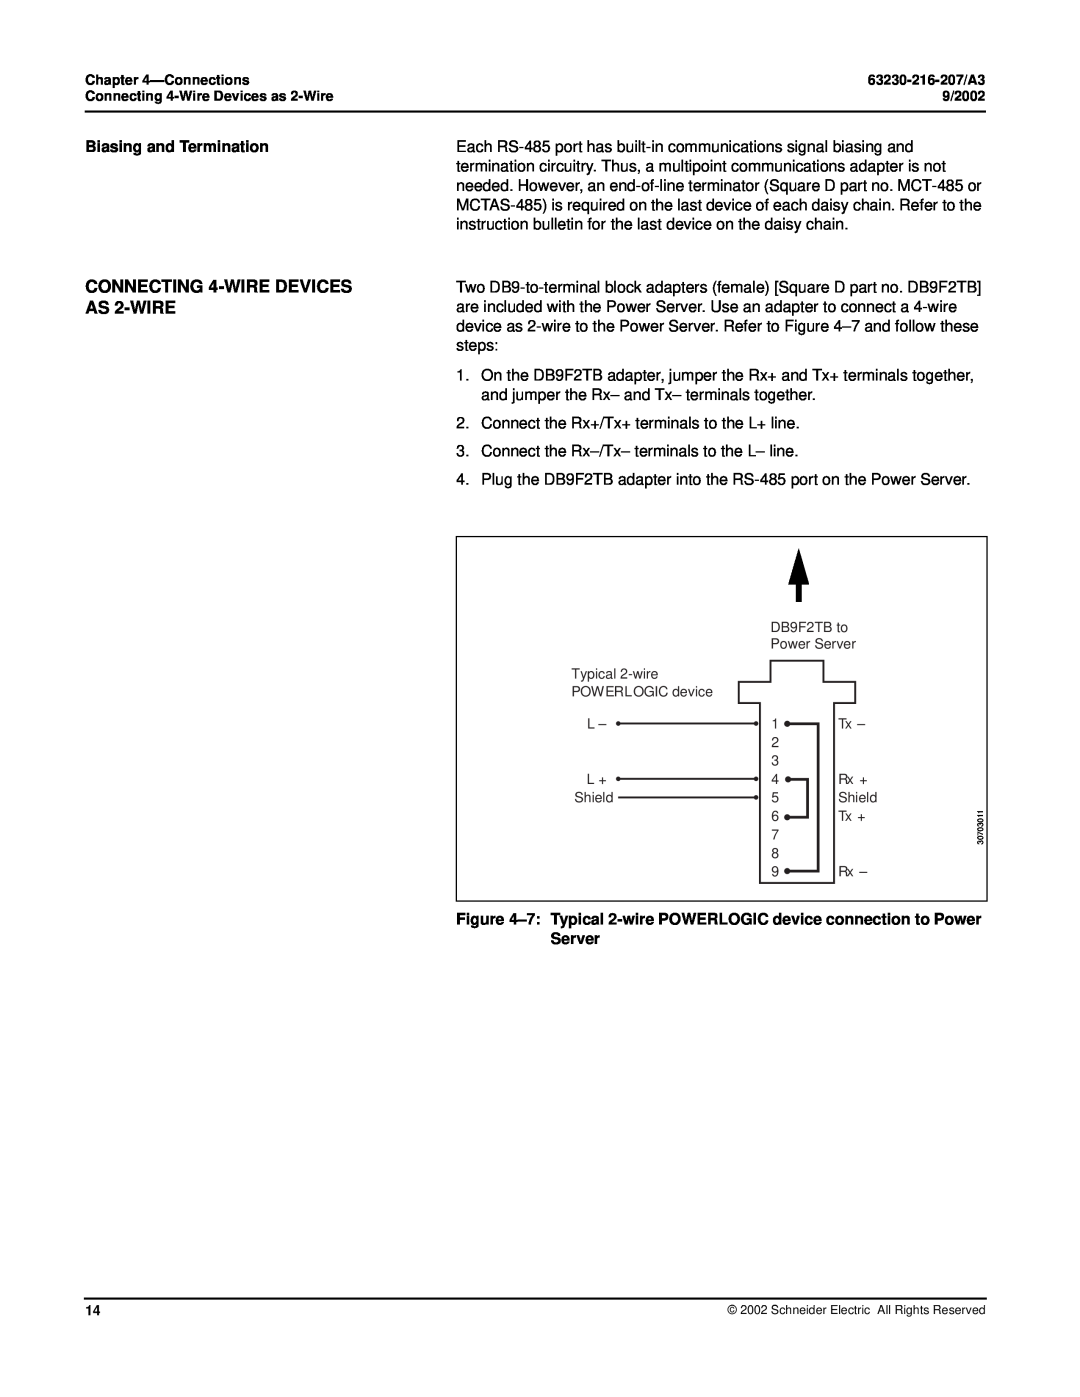 Schneider Electric PWRSRV710, PWRSRV750 setup guide CONNECTING 4-WIRE DEVICES AS 2-WIRE, Biasing and Termination 